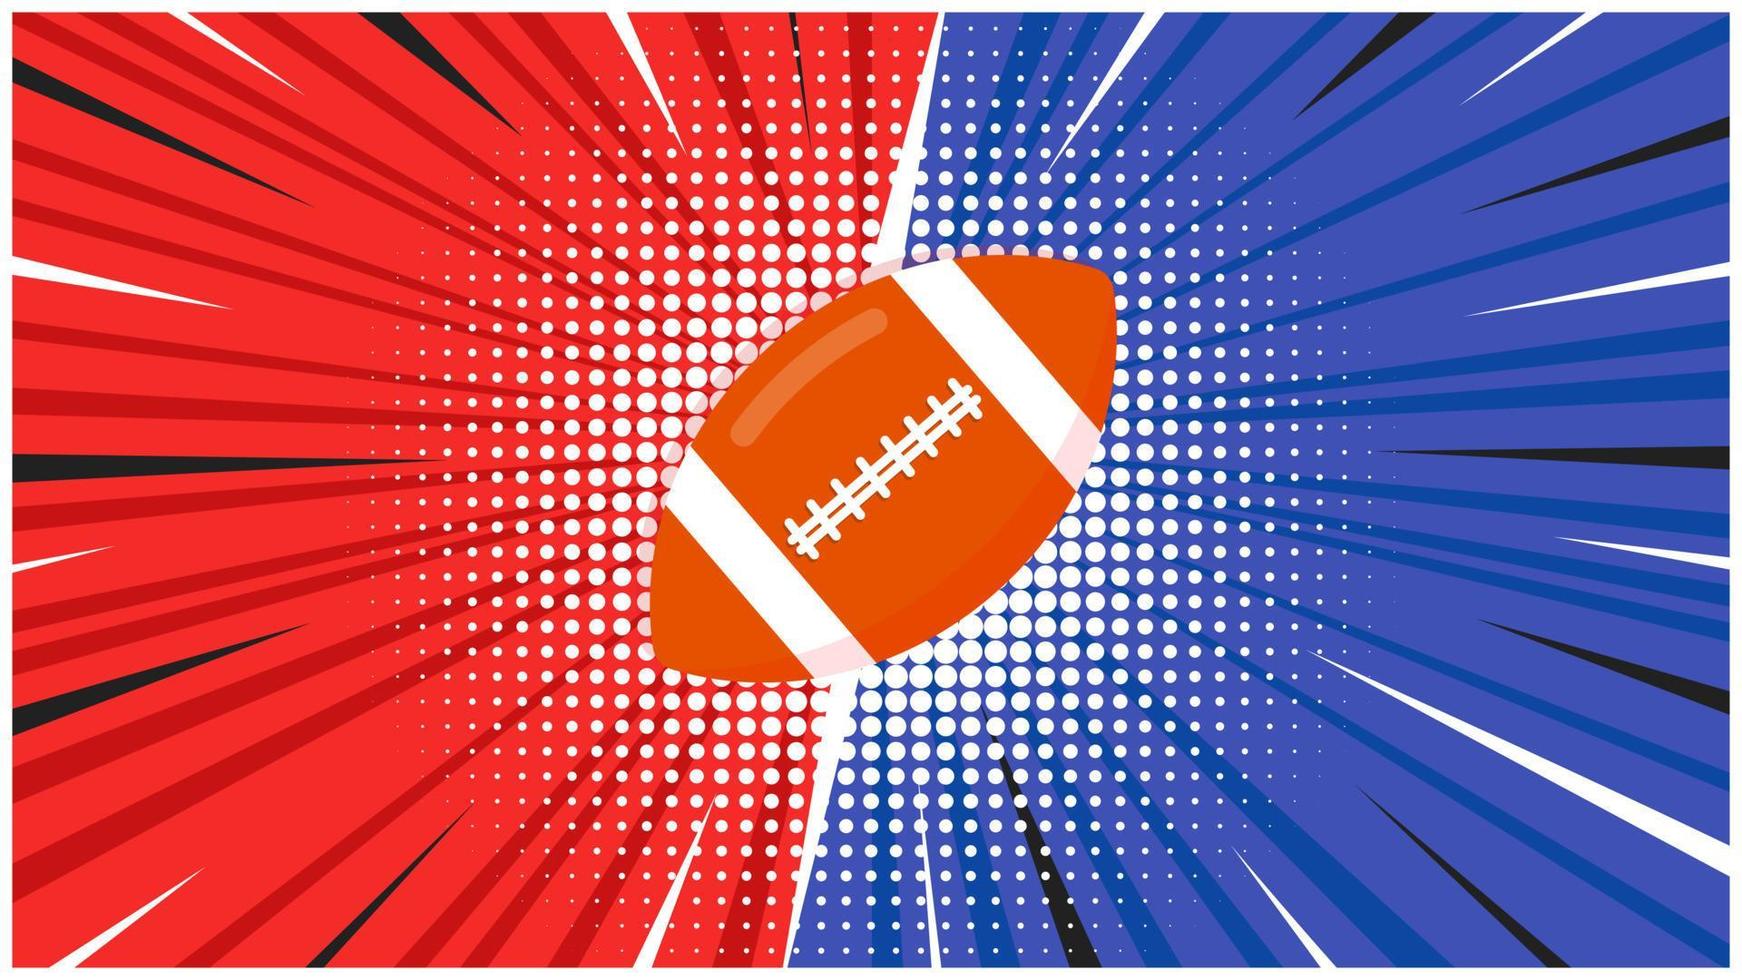 Versus screen with orange american football ball flat style design icon sign on the halftone background vector illustration. Fight screen for game battle. Football versus game